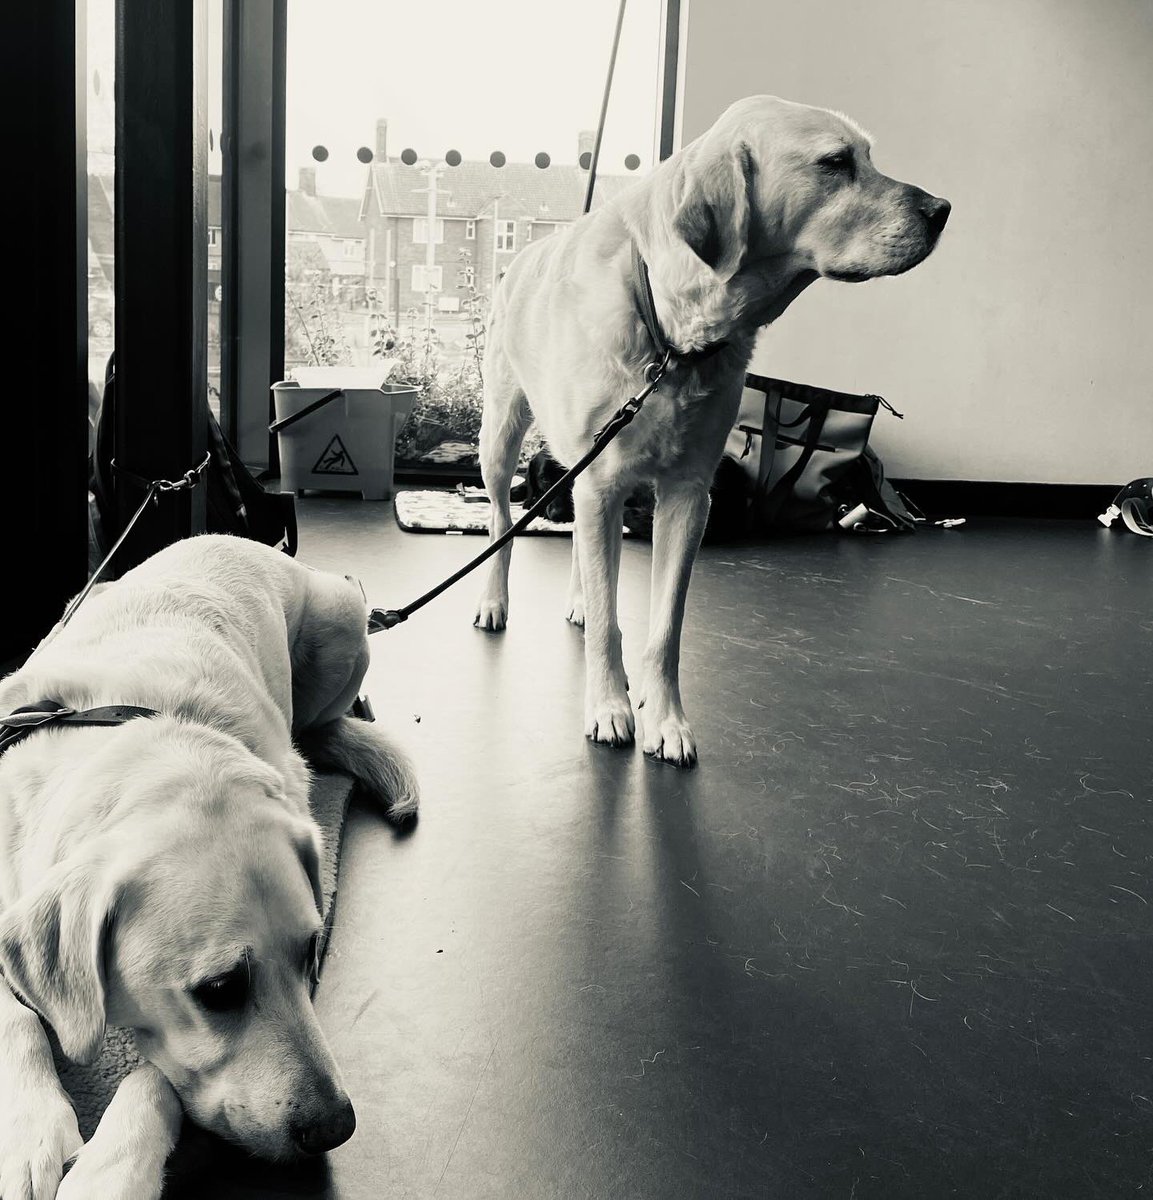 A hilarious VI drama session today @NewWolsey's NW2 space, exploring mime, memory & kung fu fighting. Not sure what our bemused #guidedog friends made of all the antics... New members are always welcome. Email us for details: coherearts@gmail.com